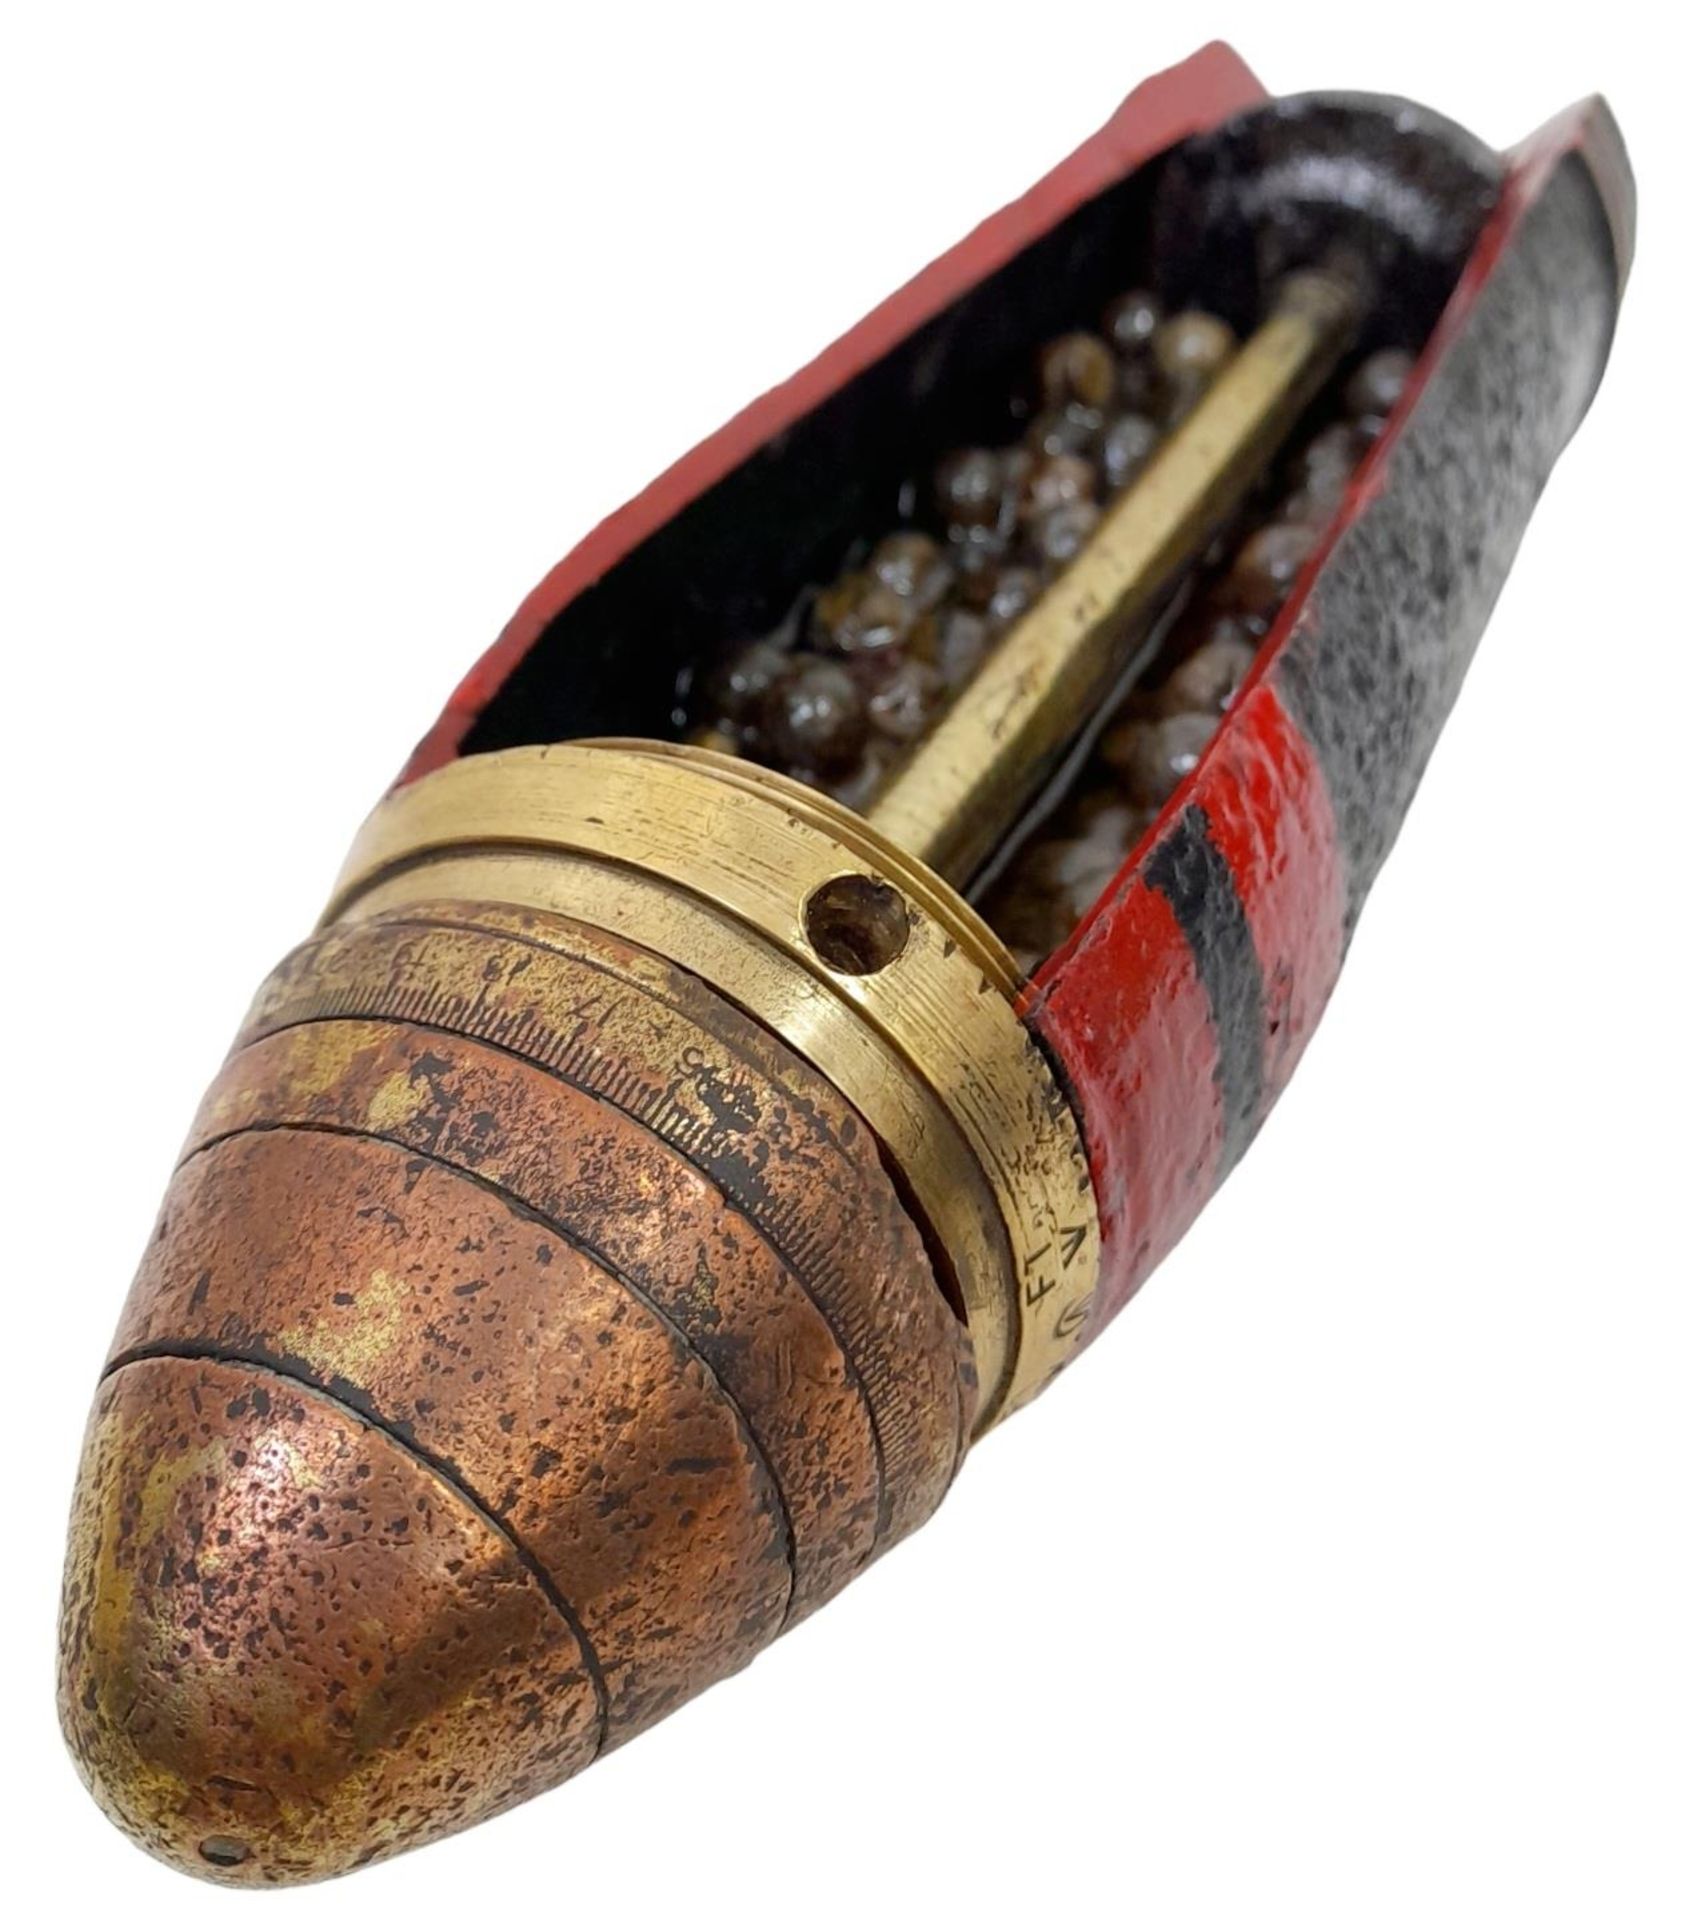 INERT WW1 Cutaway 18 Pdr Shrapnel Shell Projectile. Complete with Brass No 80 Time Fuse. UK MAINLAND